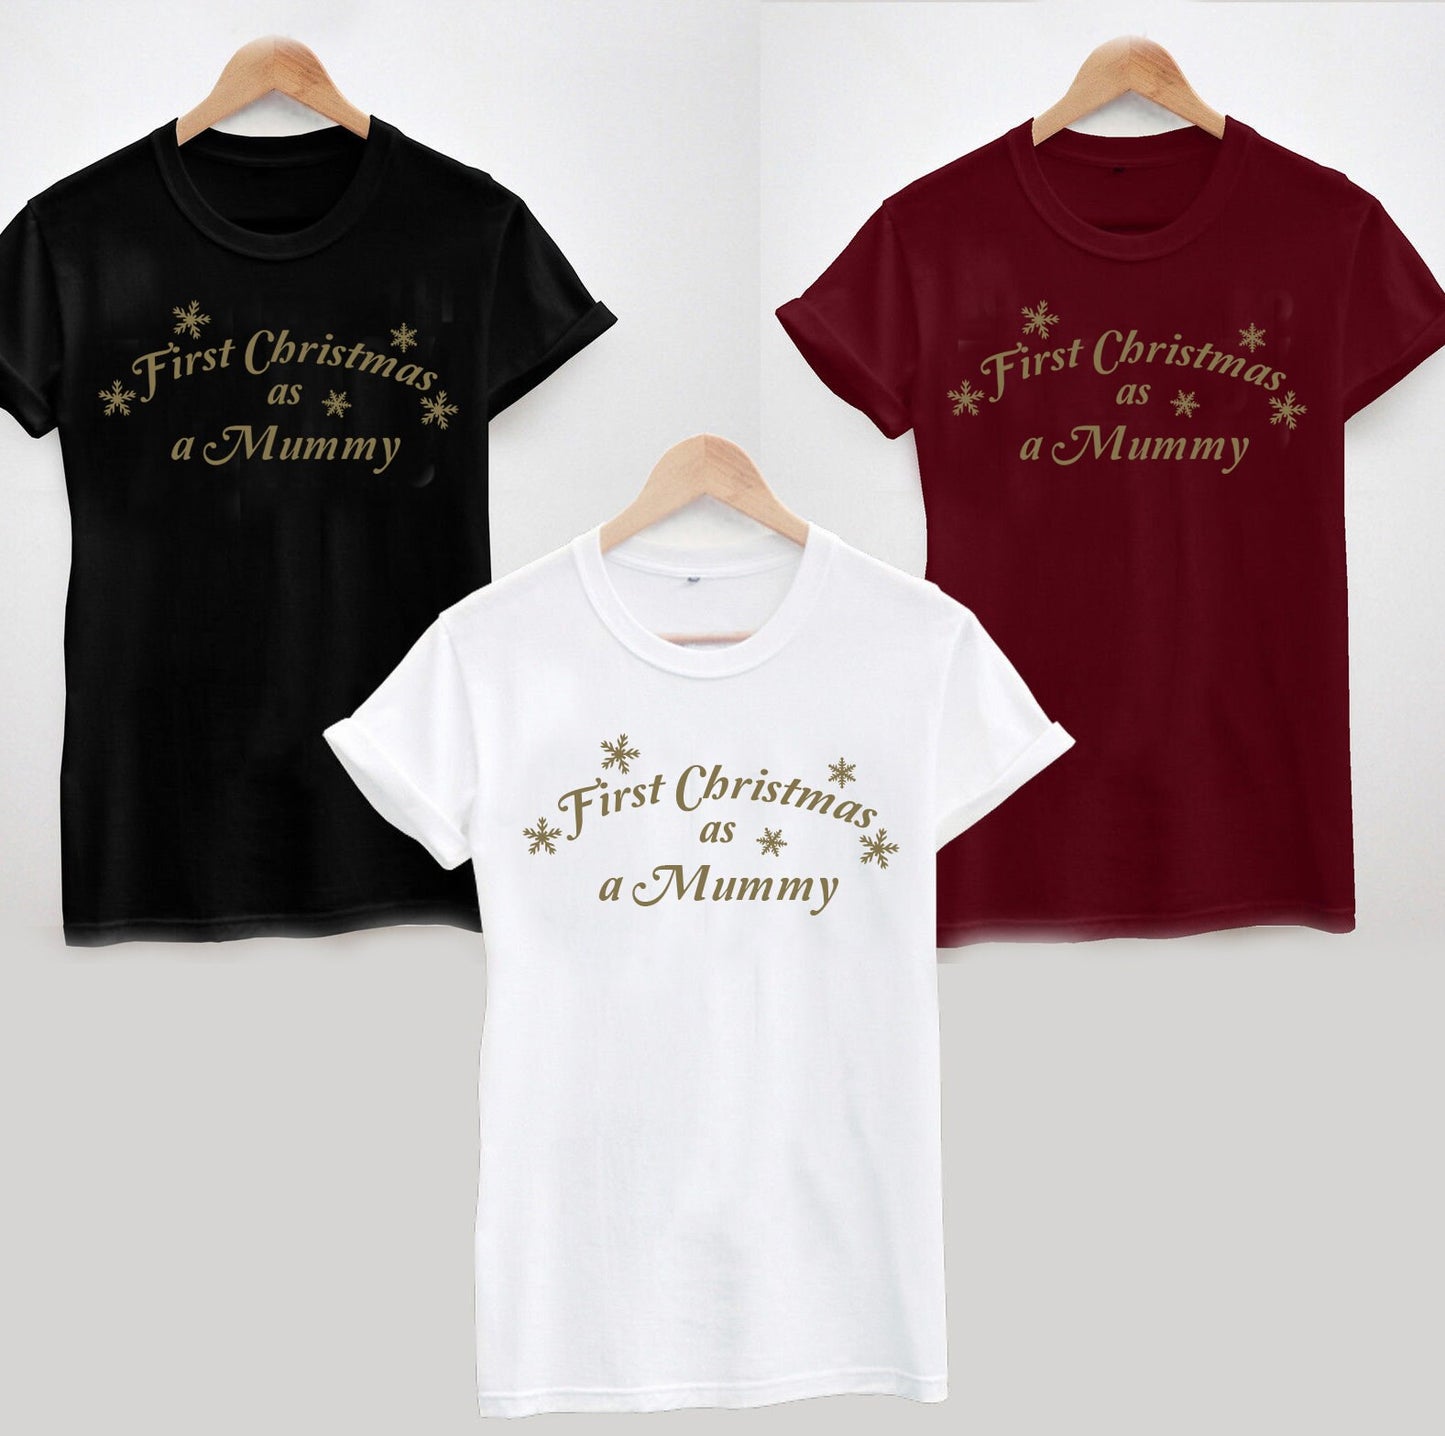 First Christmas as a Mummy T-shirt, Gold Print - Can be changed to Mum or Mommy or any other variation